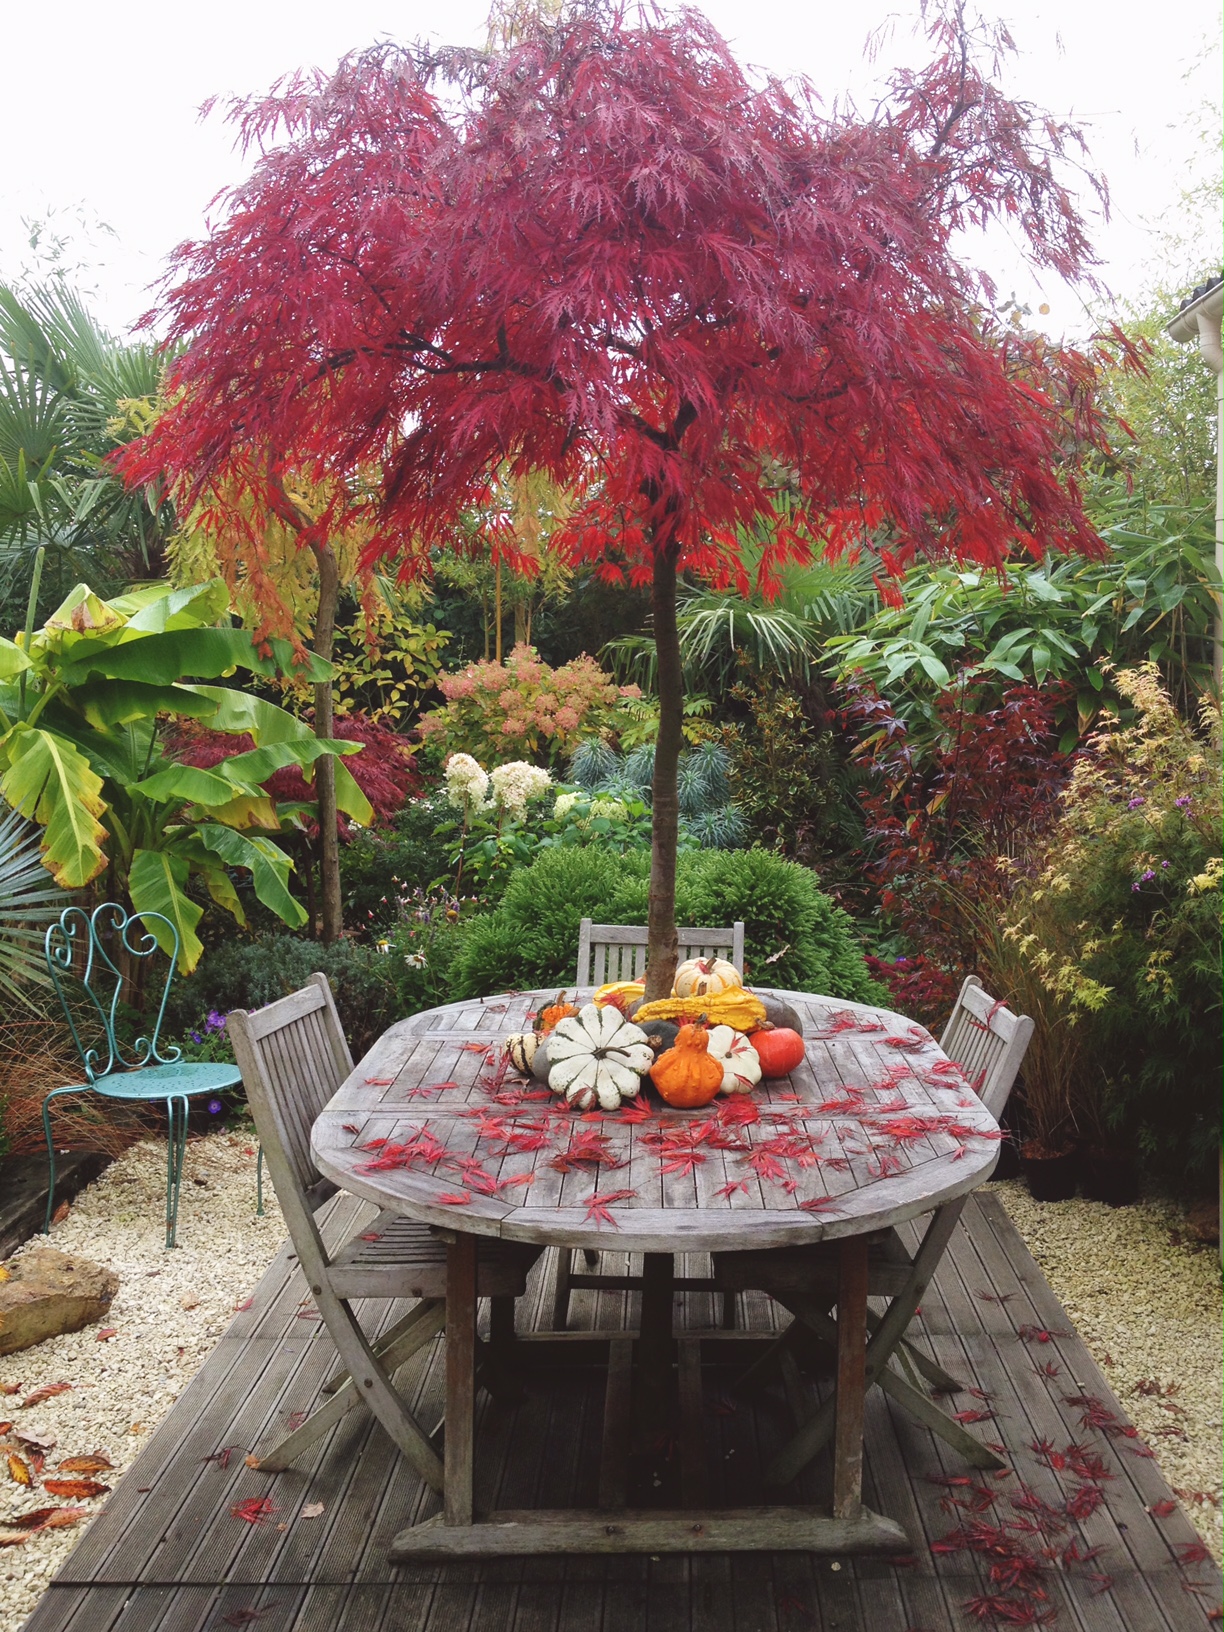 Japanese maple in the fall in a french town garden.